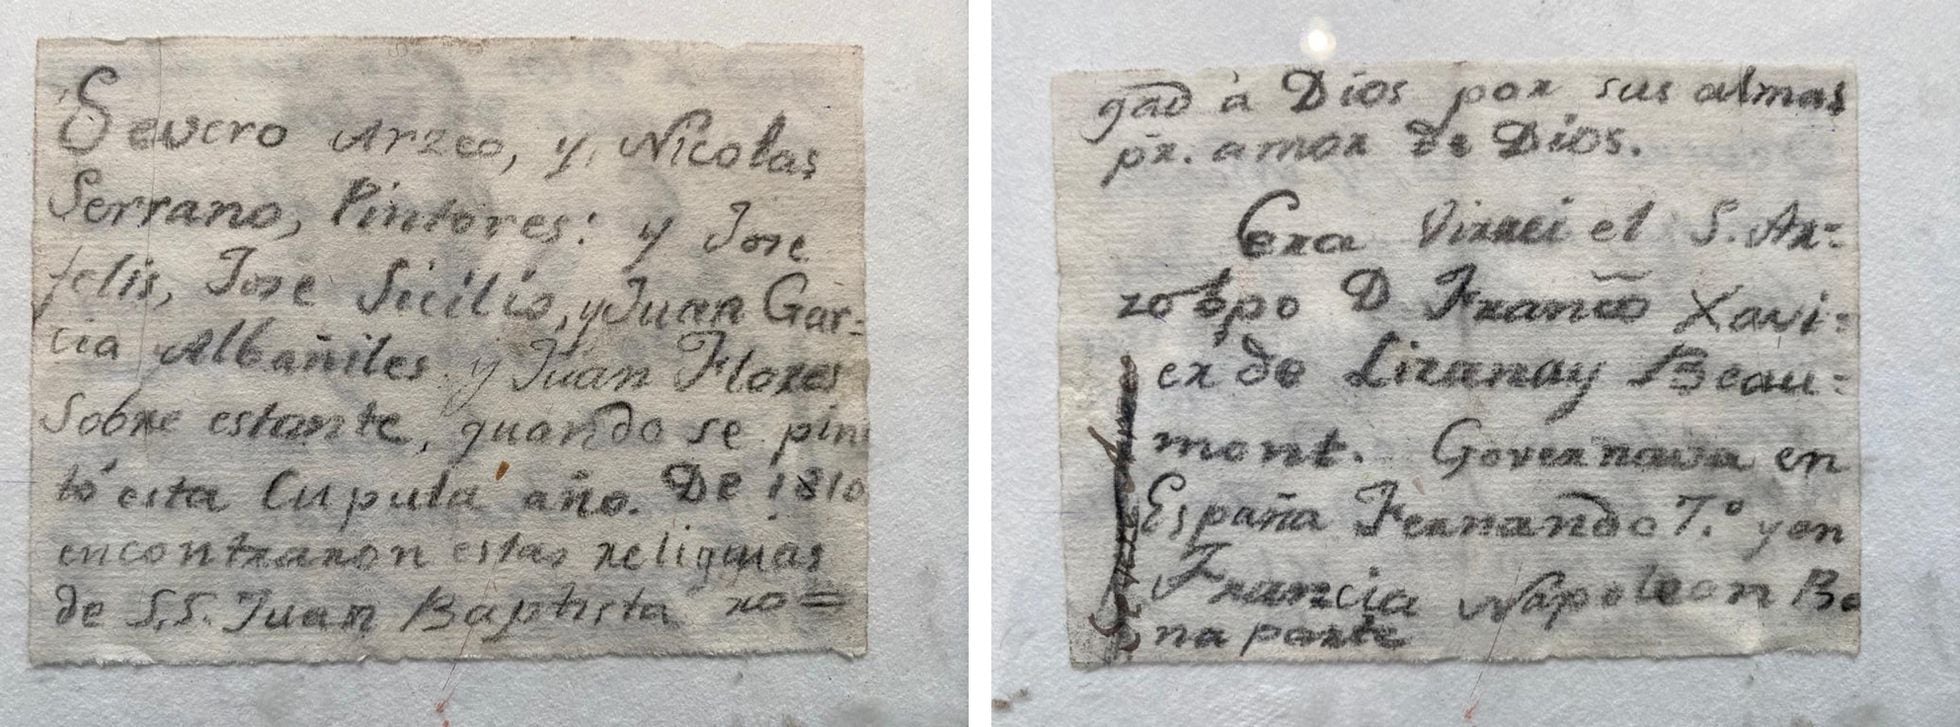 Letter from 1810 found in the box of San Juan Bautista 